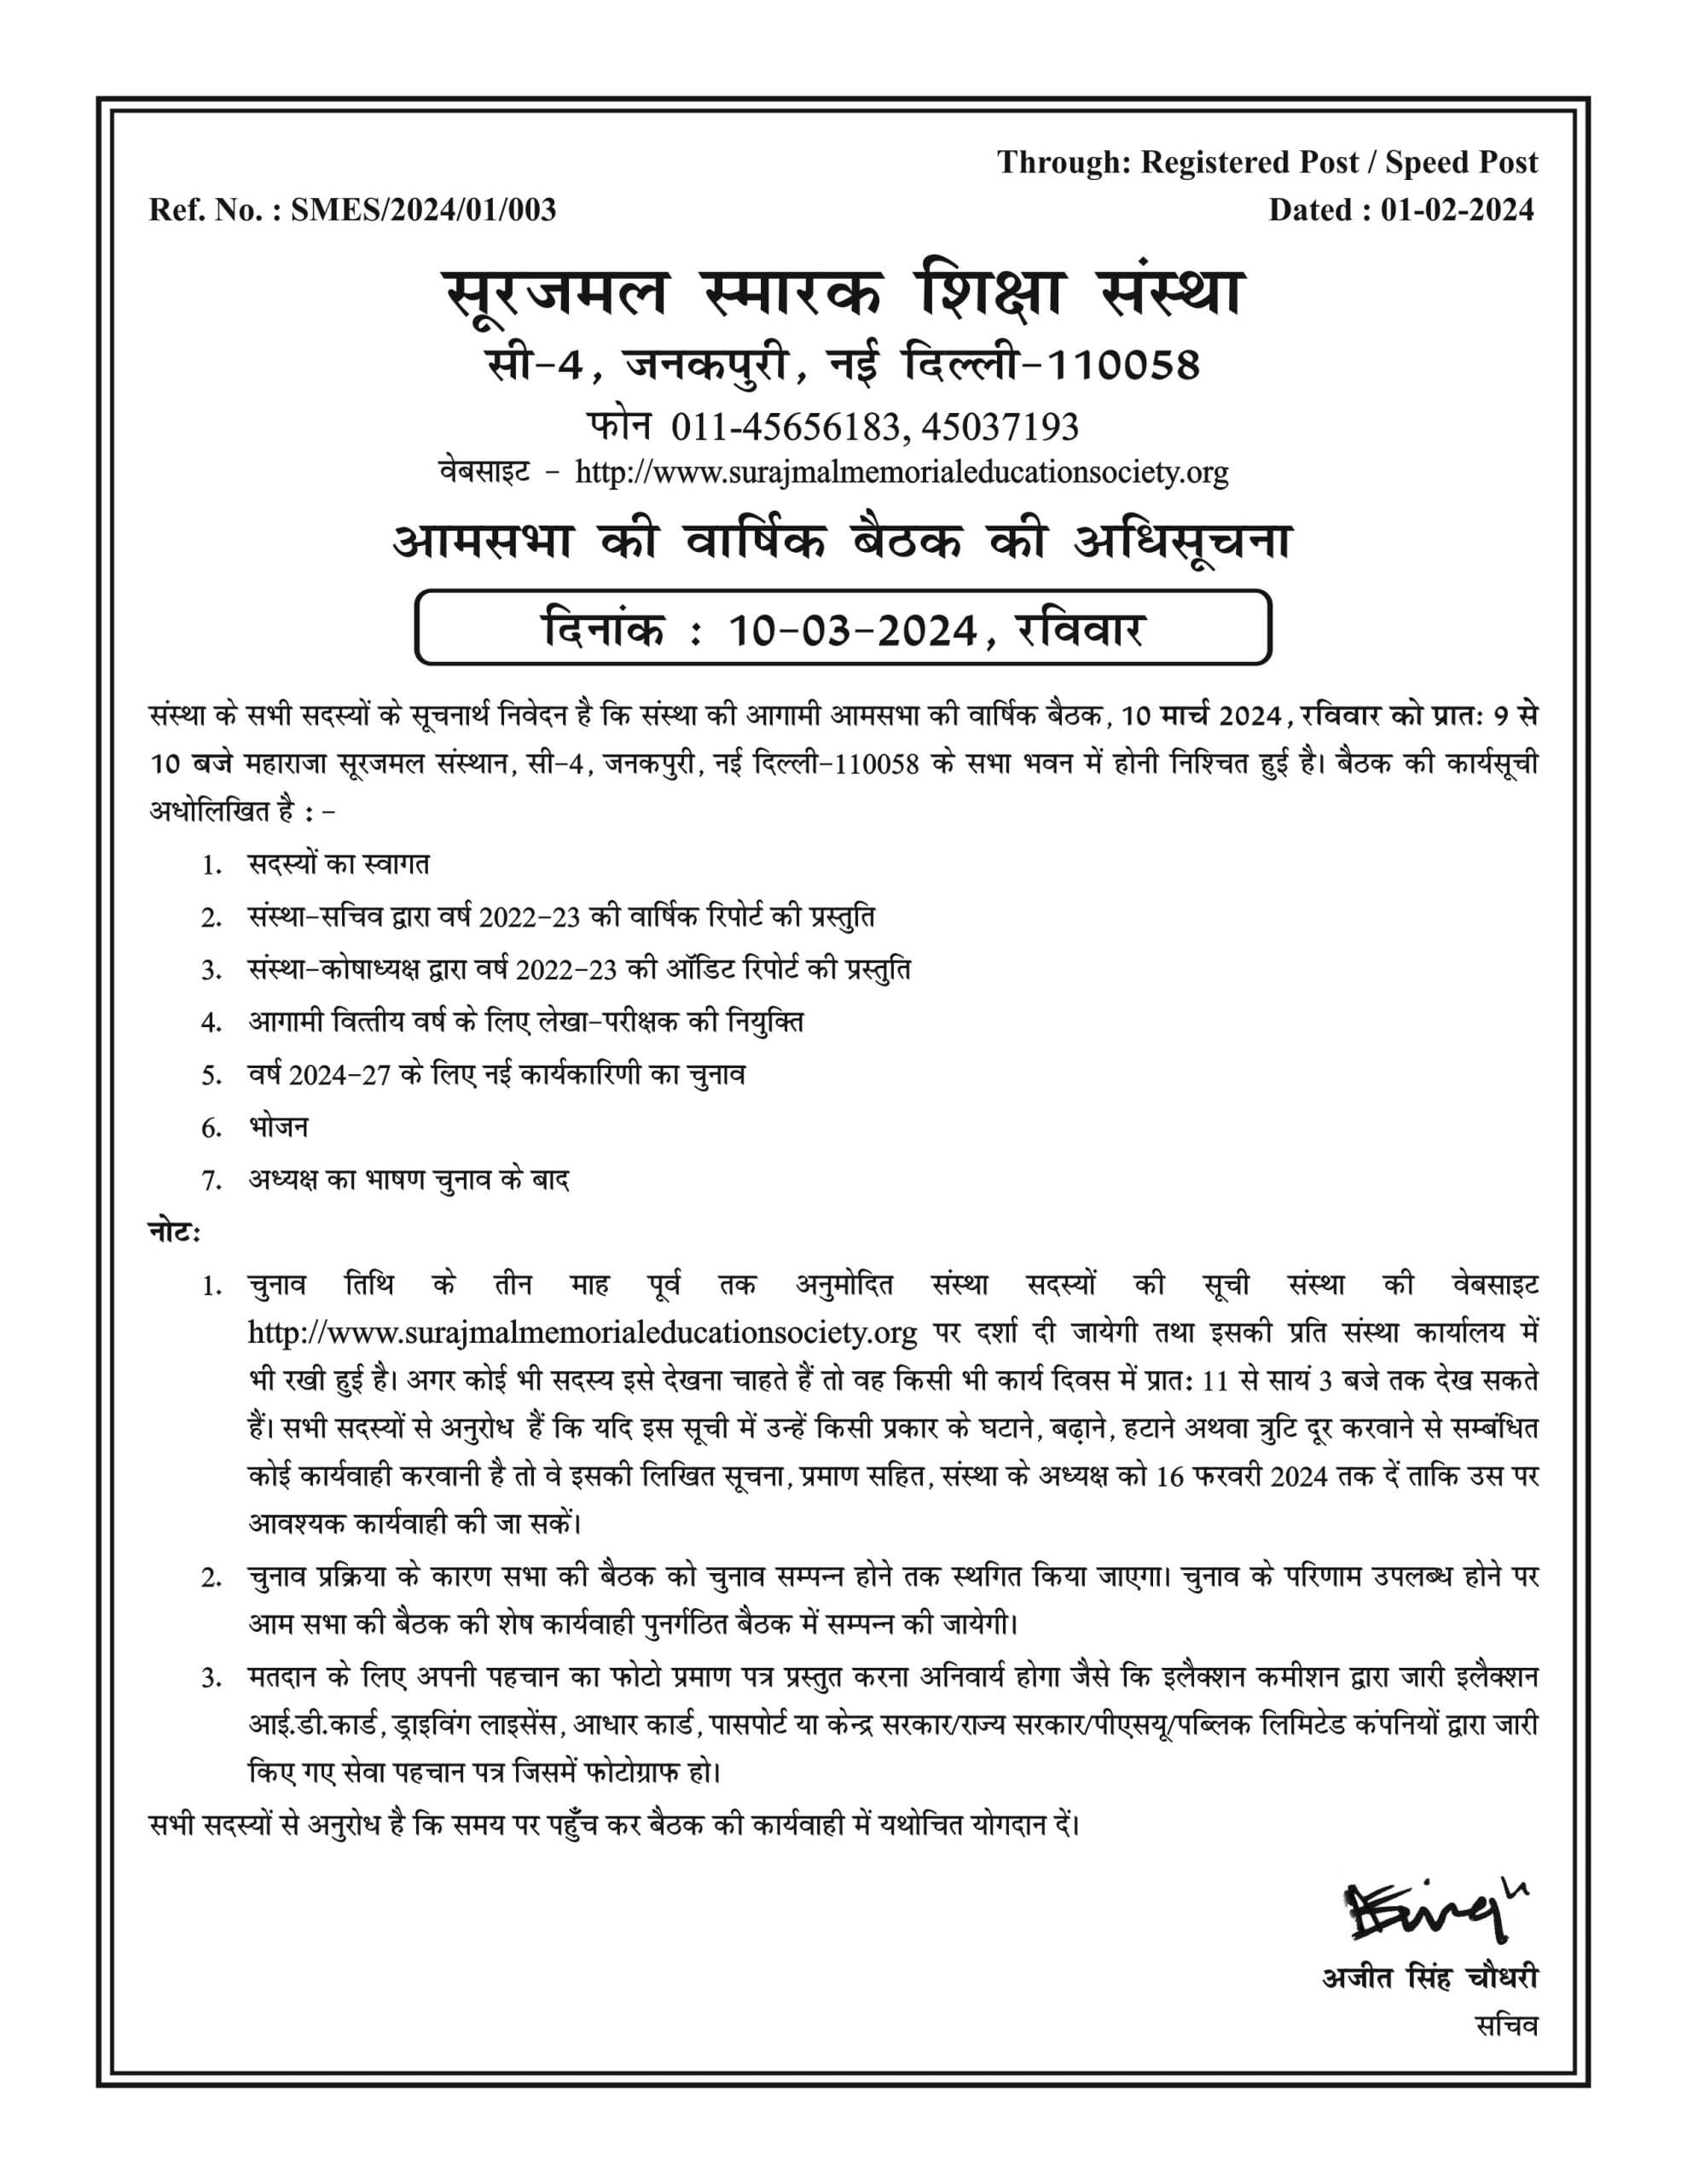 Notice of AGM on 10/March/2024